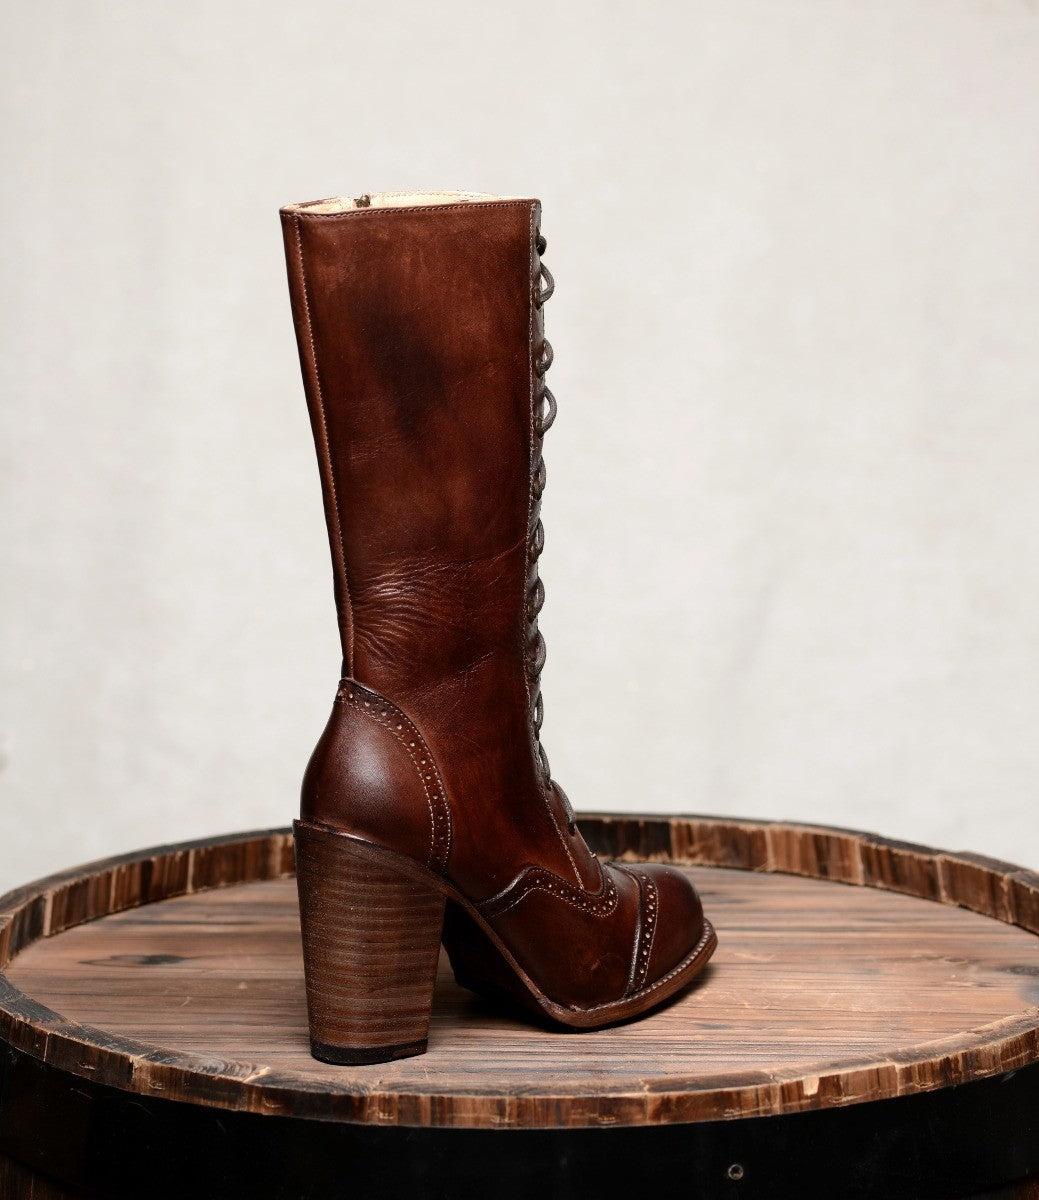 Victorian Inspired Mid-Calf Leather Boots in Teak Rustic - SOLD OUT